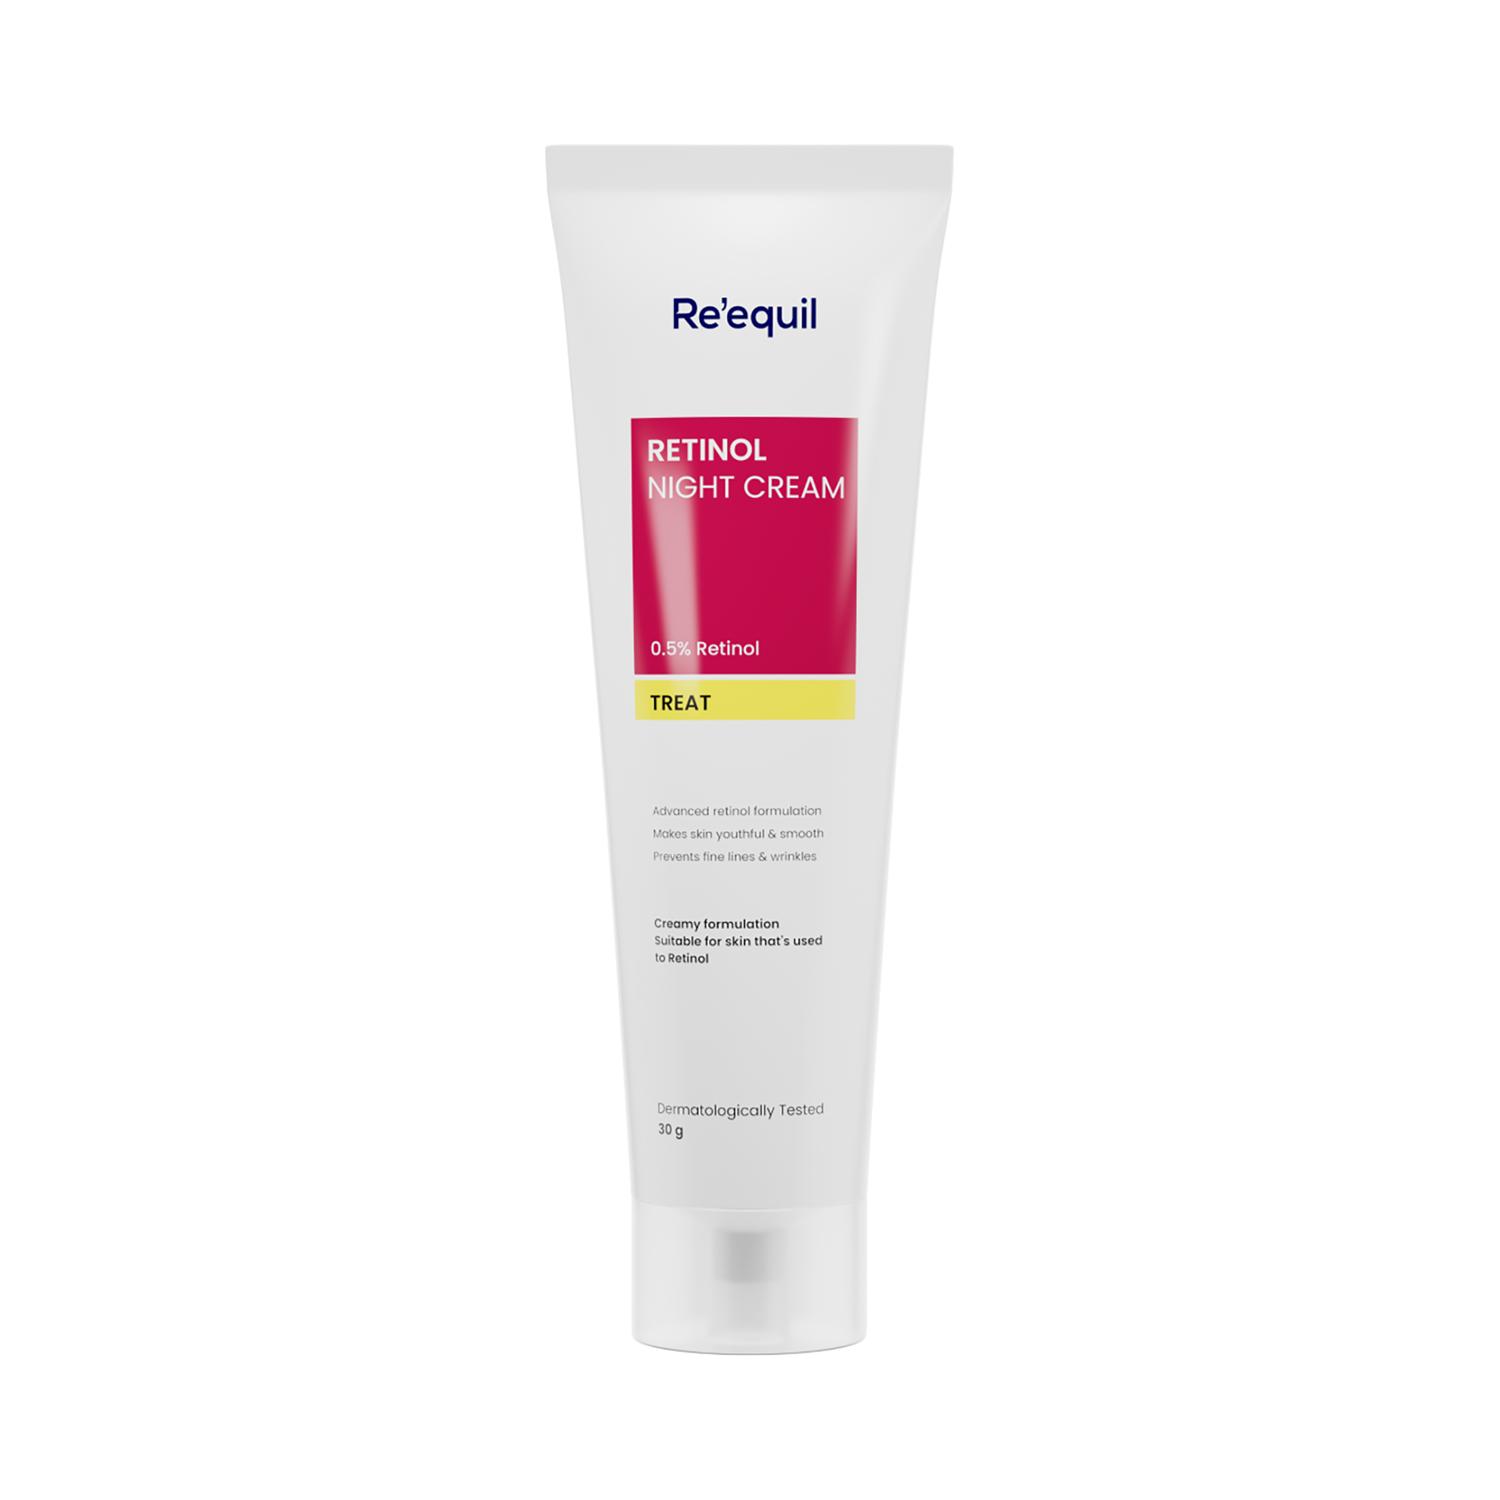 Re'equil | Re'equil 0.5% Retinol Night Cream Makes Skin Youthful and Smooth Wrinkles (30 g)